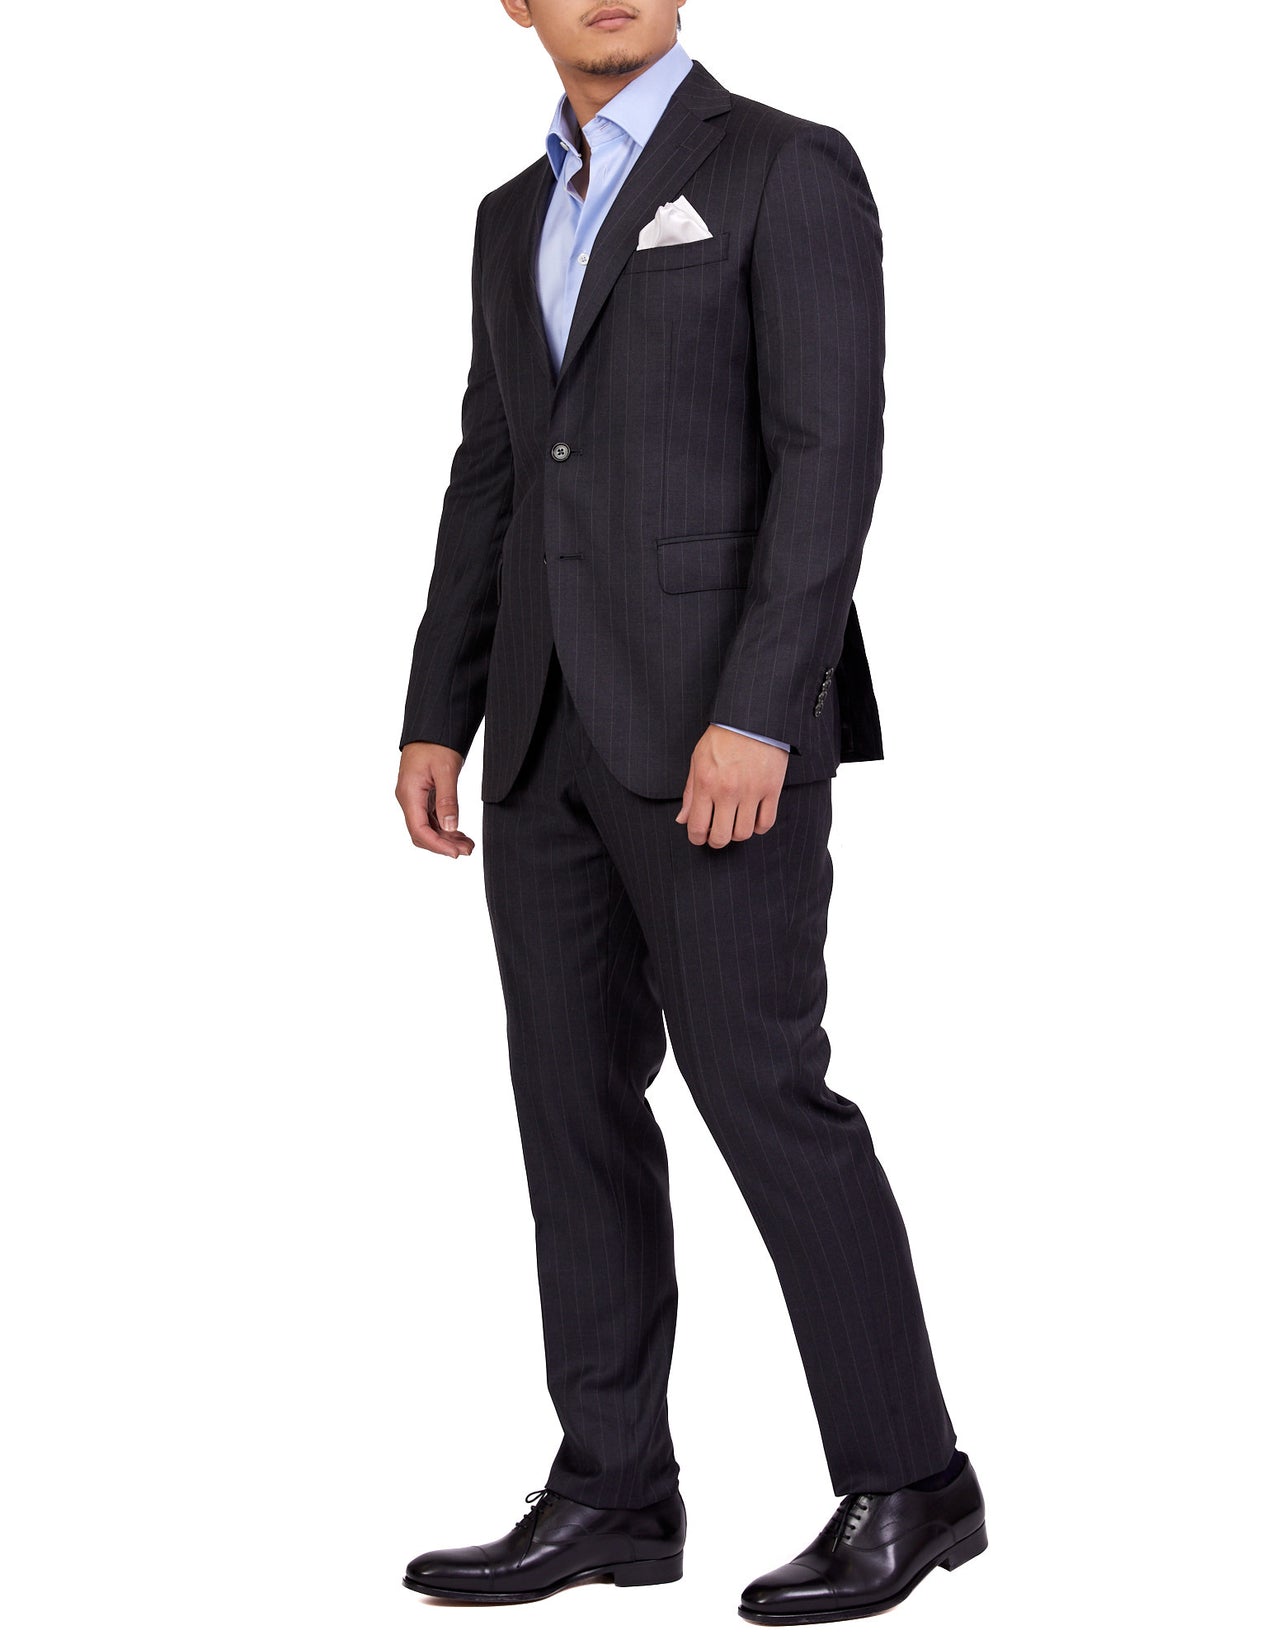 Henry Sartorial Boston Suit Charcoal LG